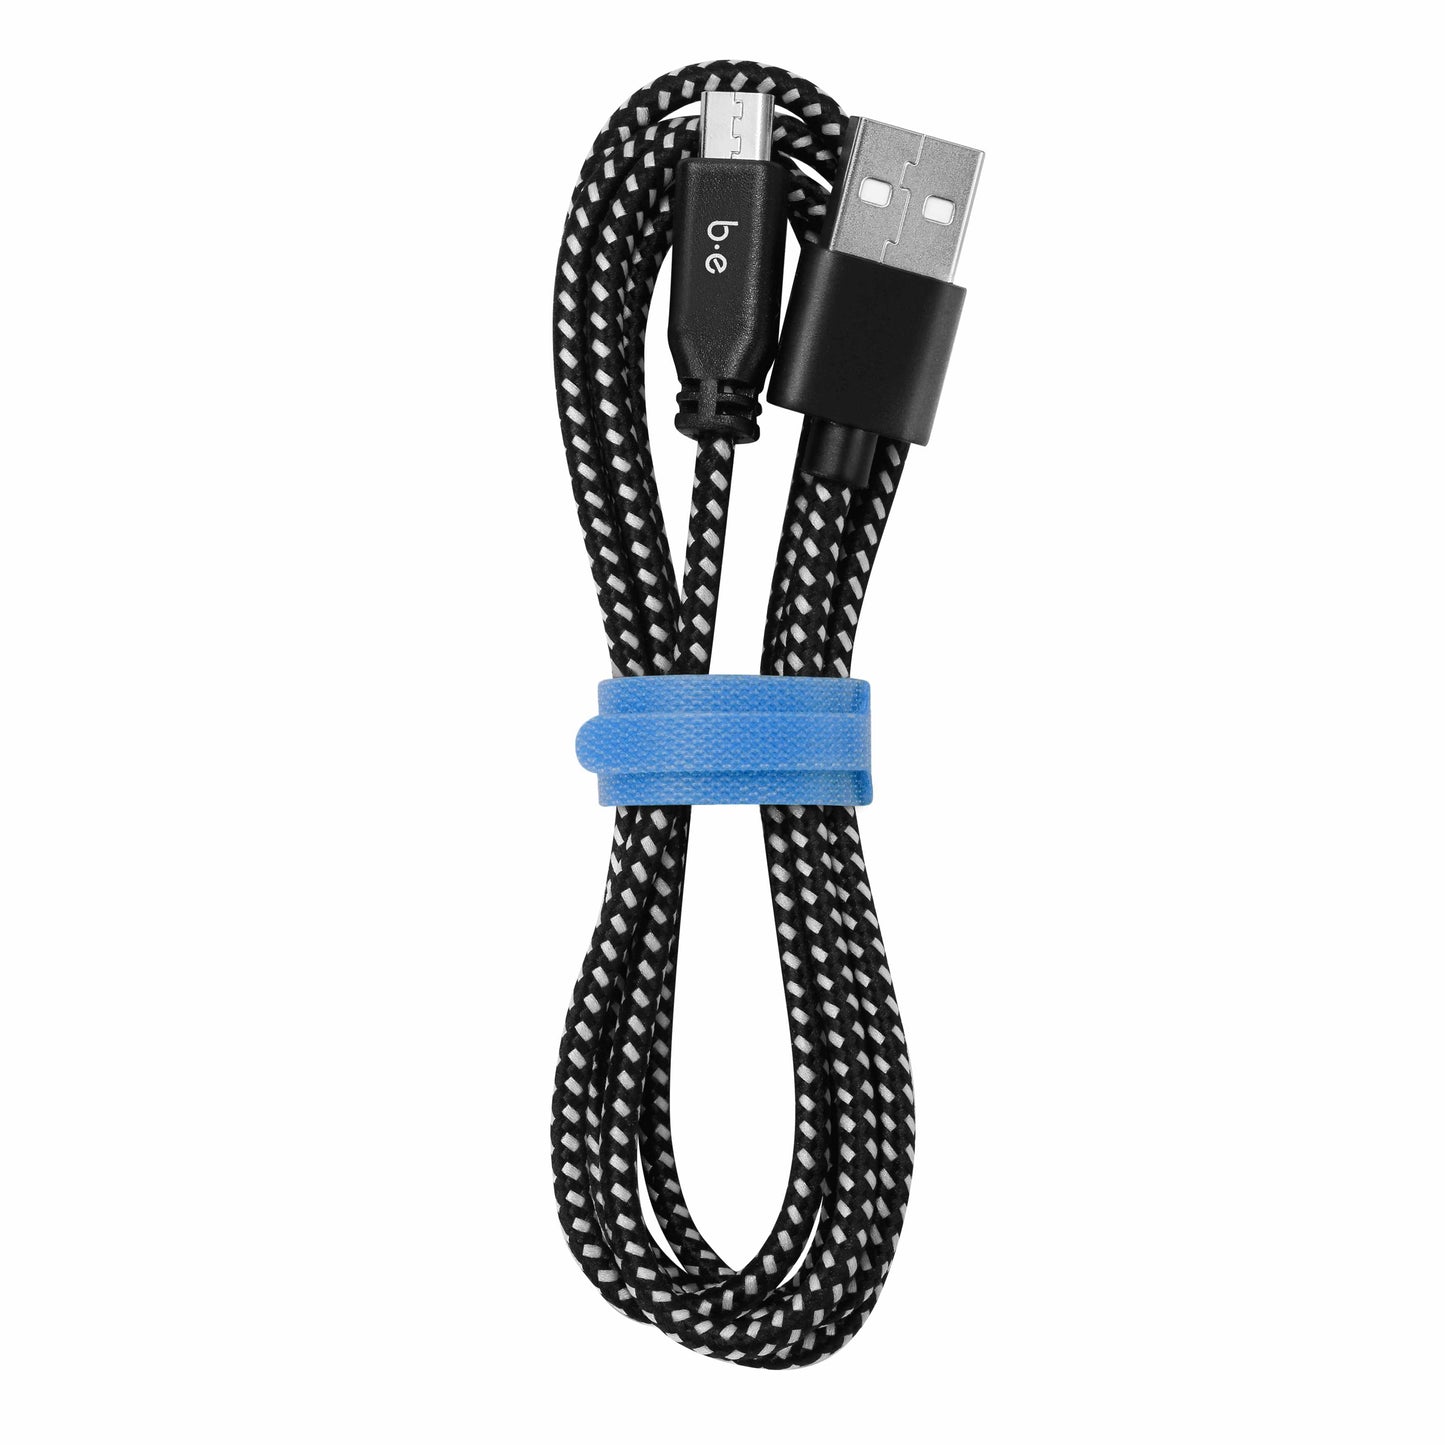 Braided Charge/Sync Micro USB Cable 4ft Zebra